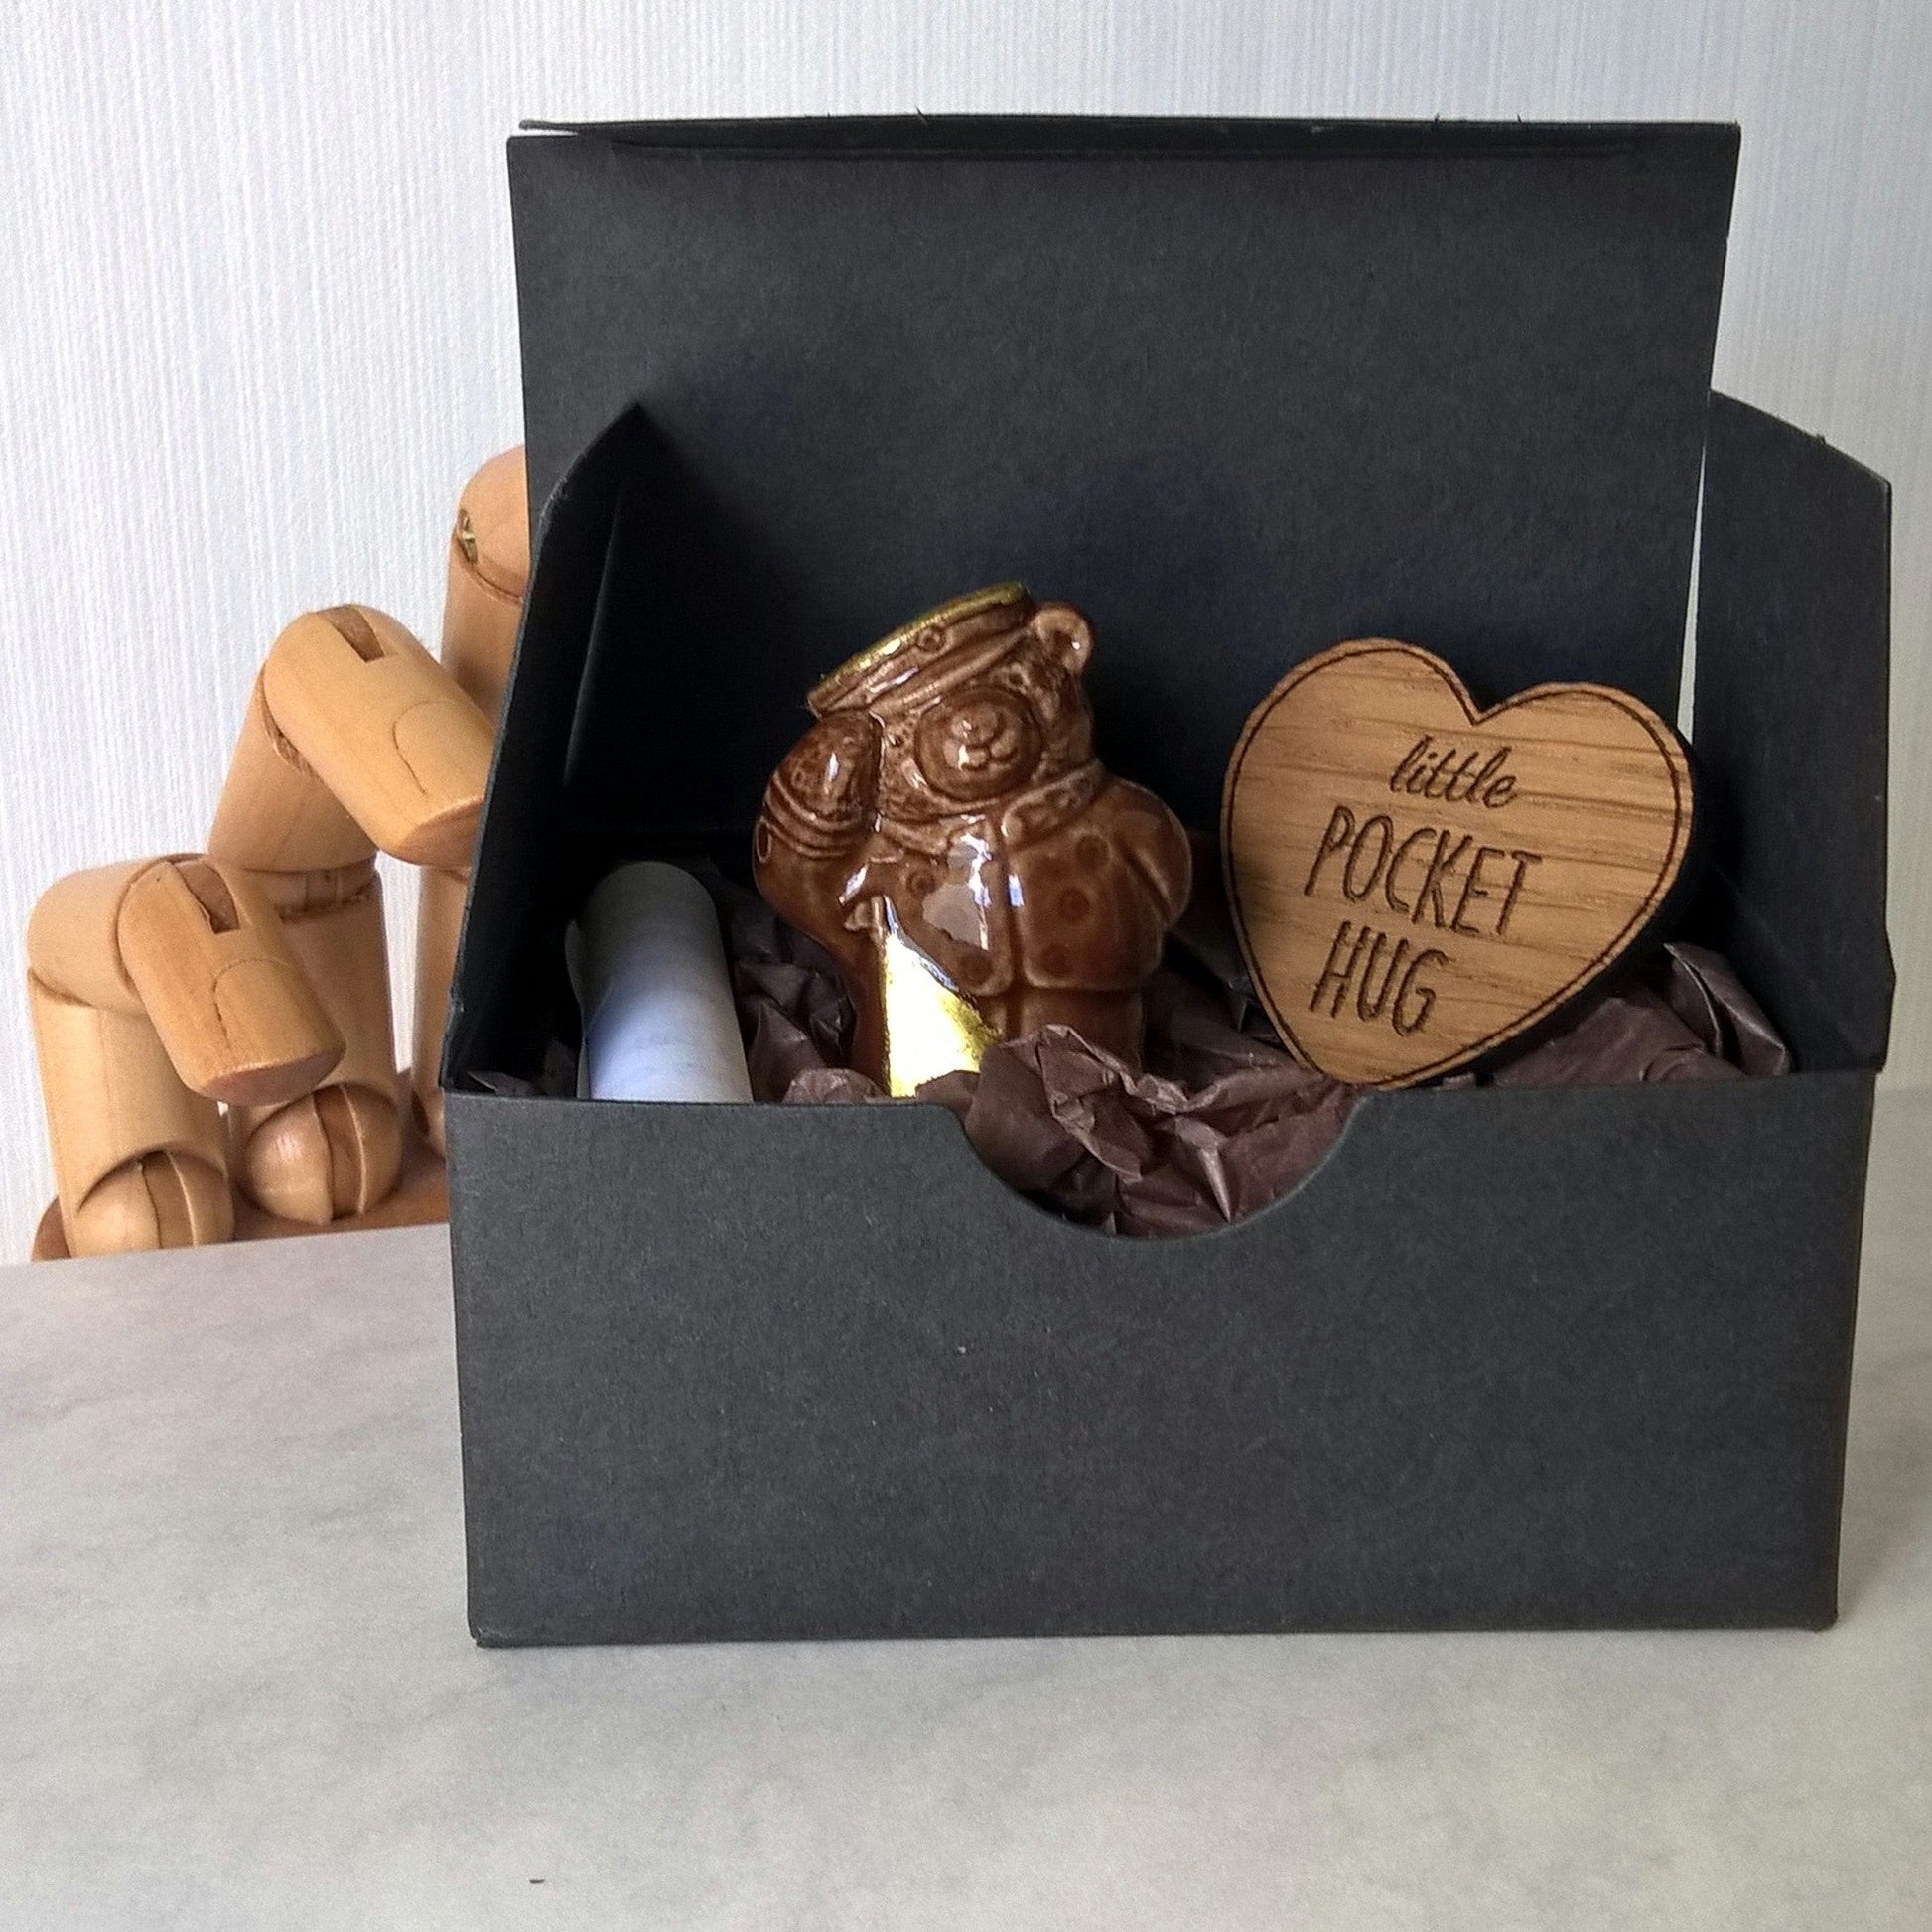 The miniature vintage bear and engraved heart are boxed ready for gifting